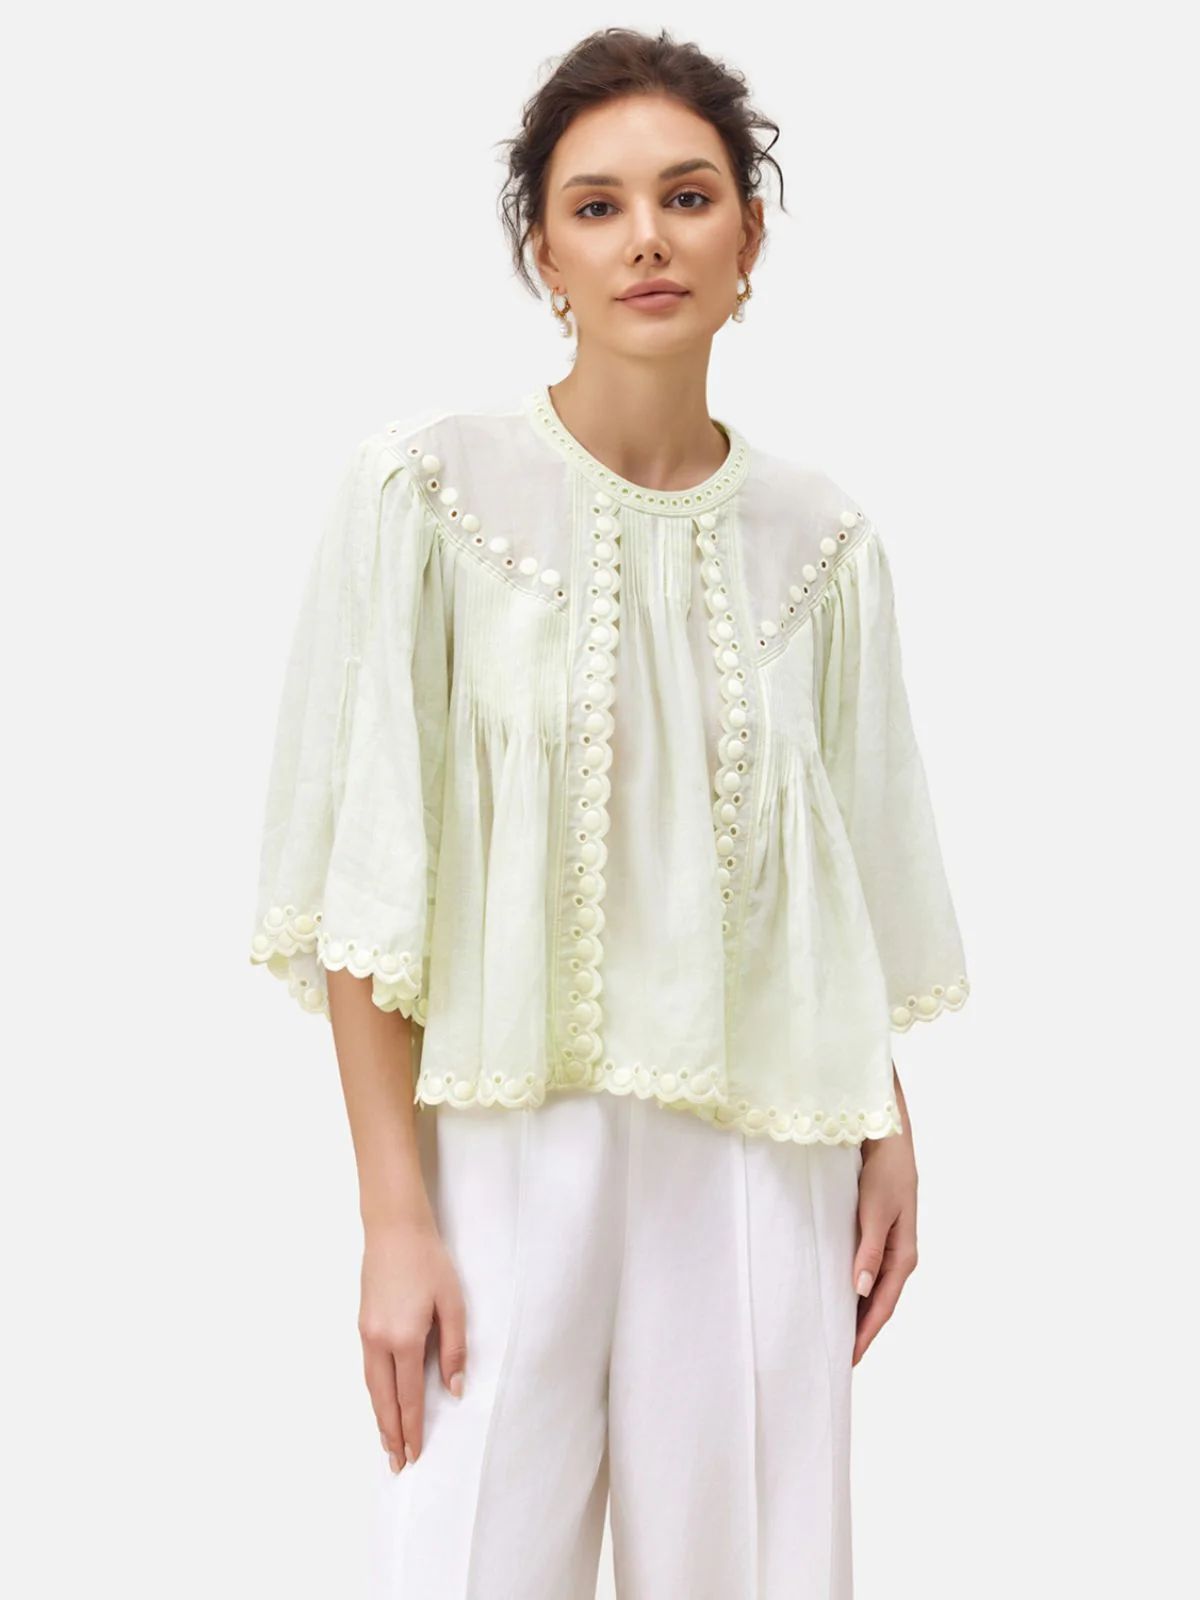 French-Origin Handcrafted Embroidered Blouse | Richradiqs